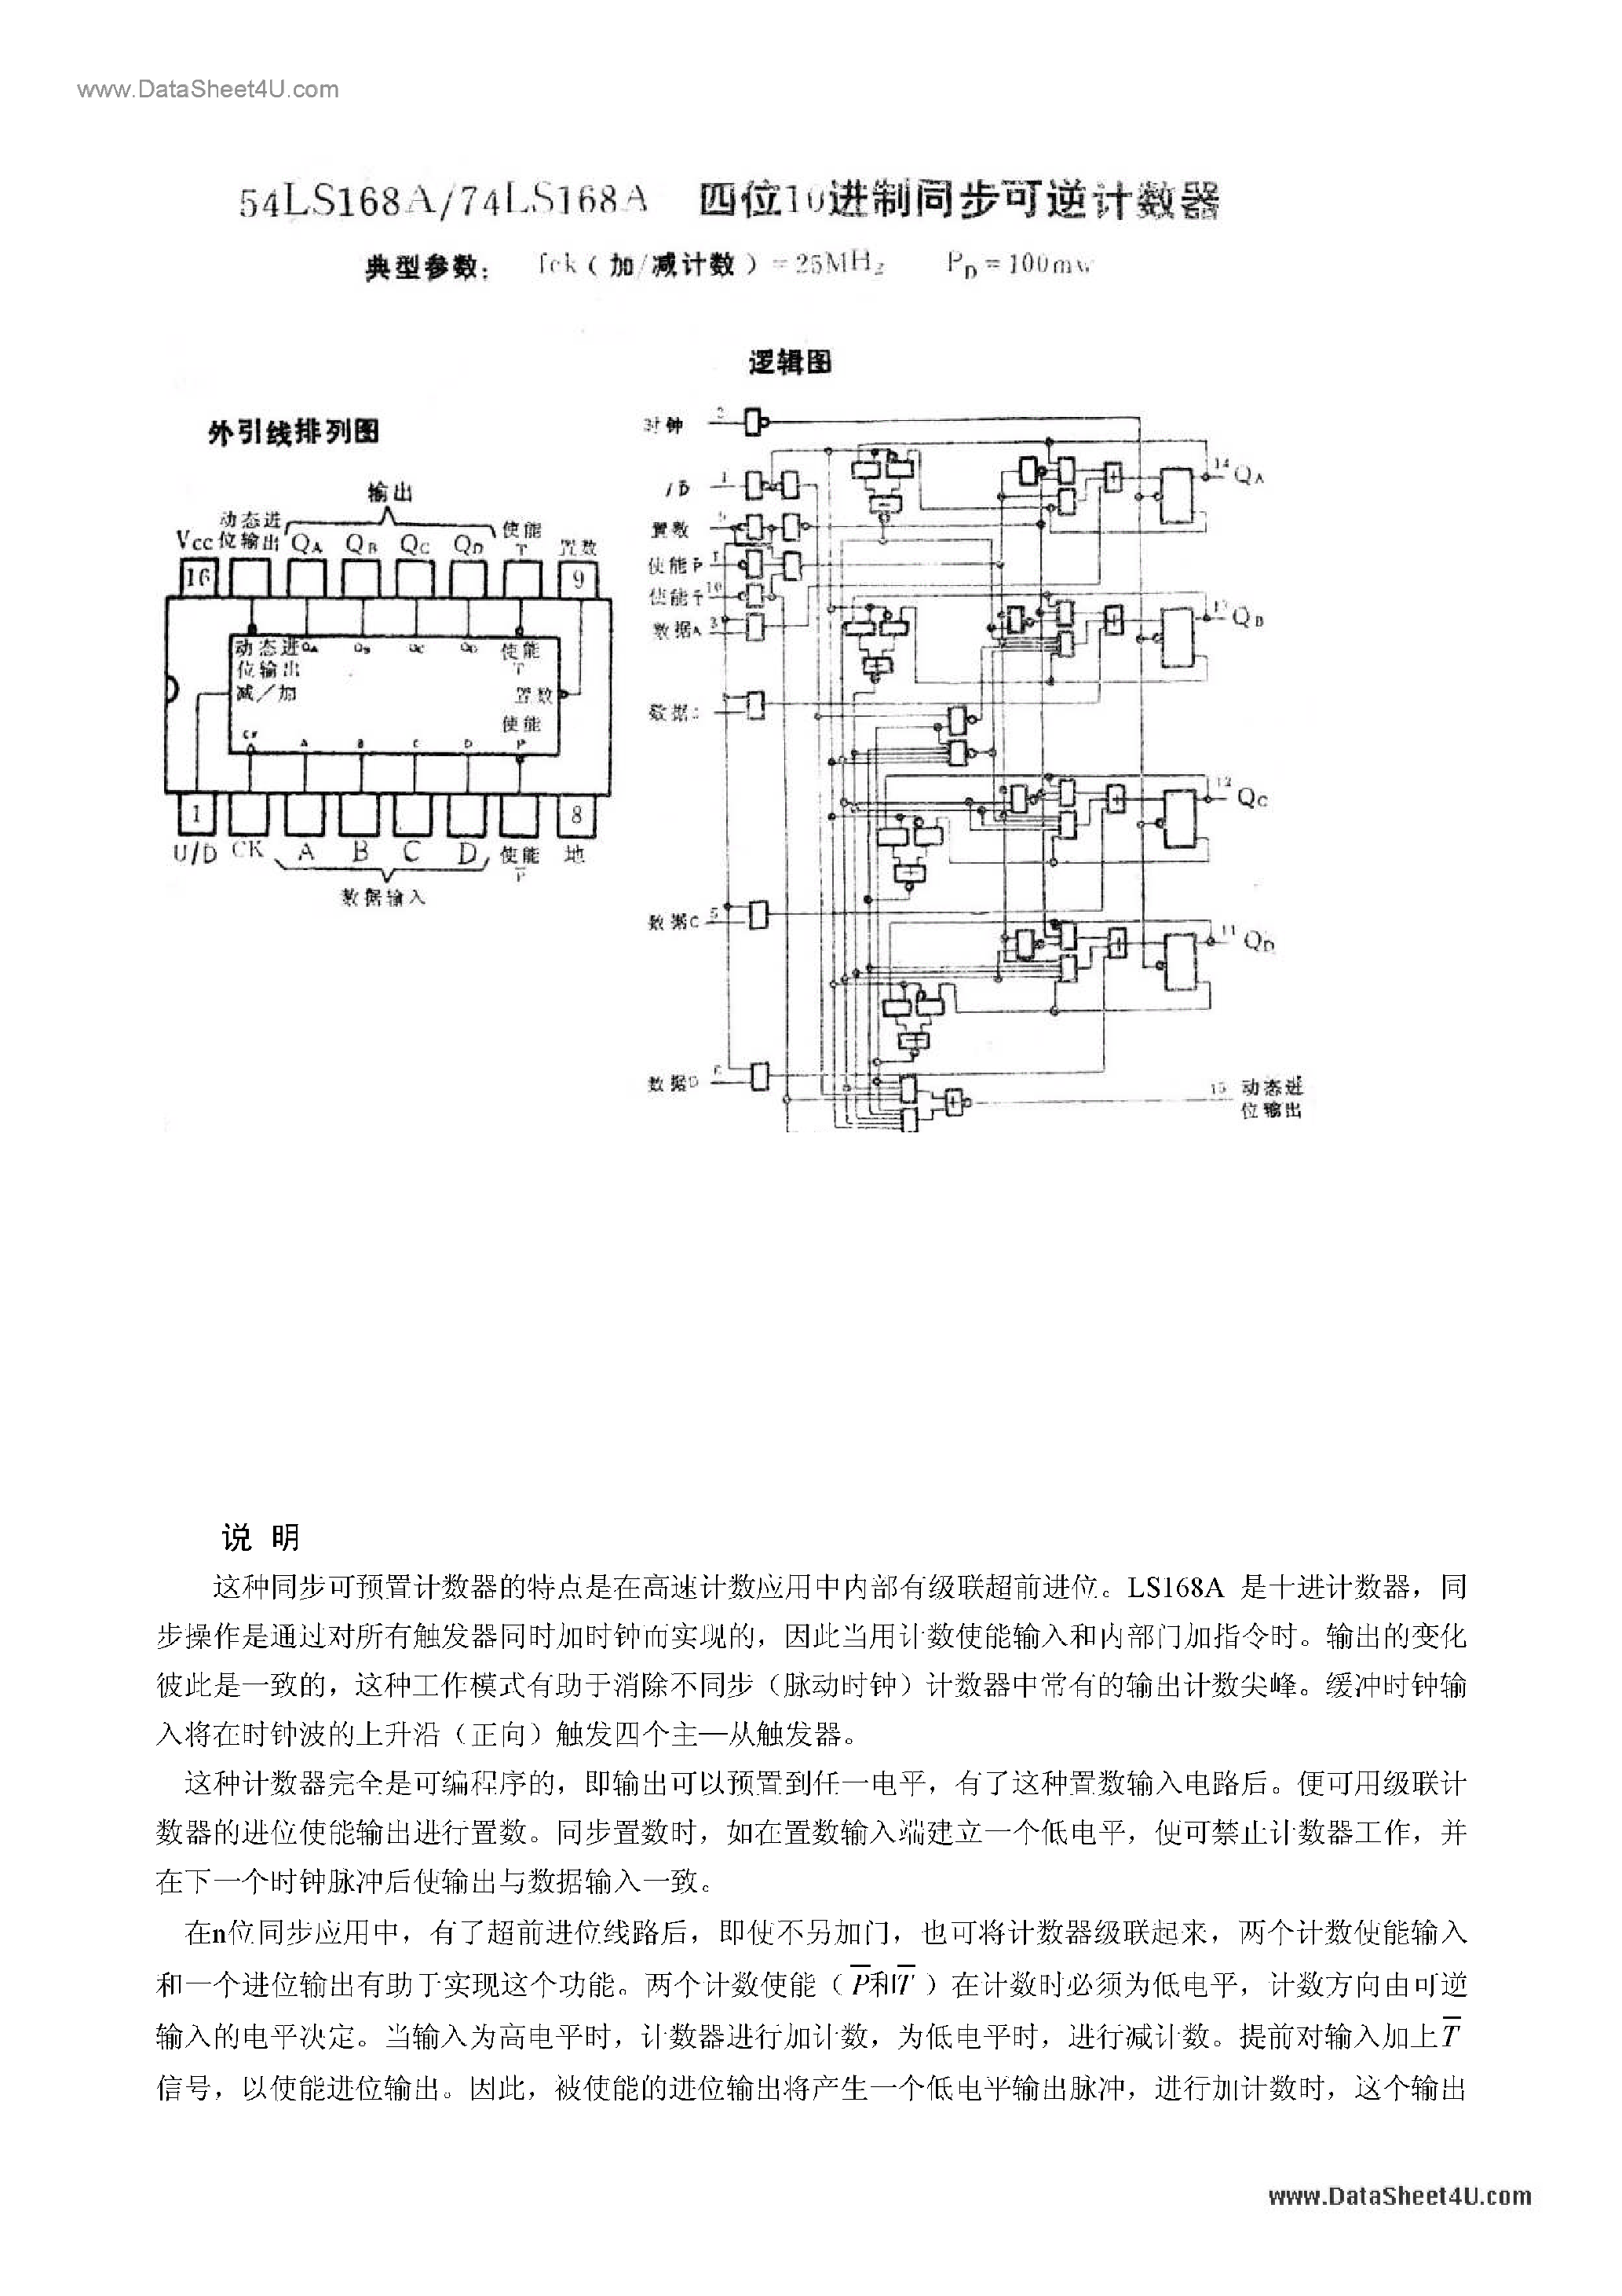 Datasheet 54LS168A - BCD DECADE/MODULO 16 BINARY SYNCHRONOUS BI-DIRECTIONAL COUNTERS page 1